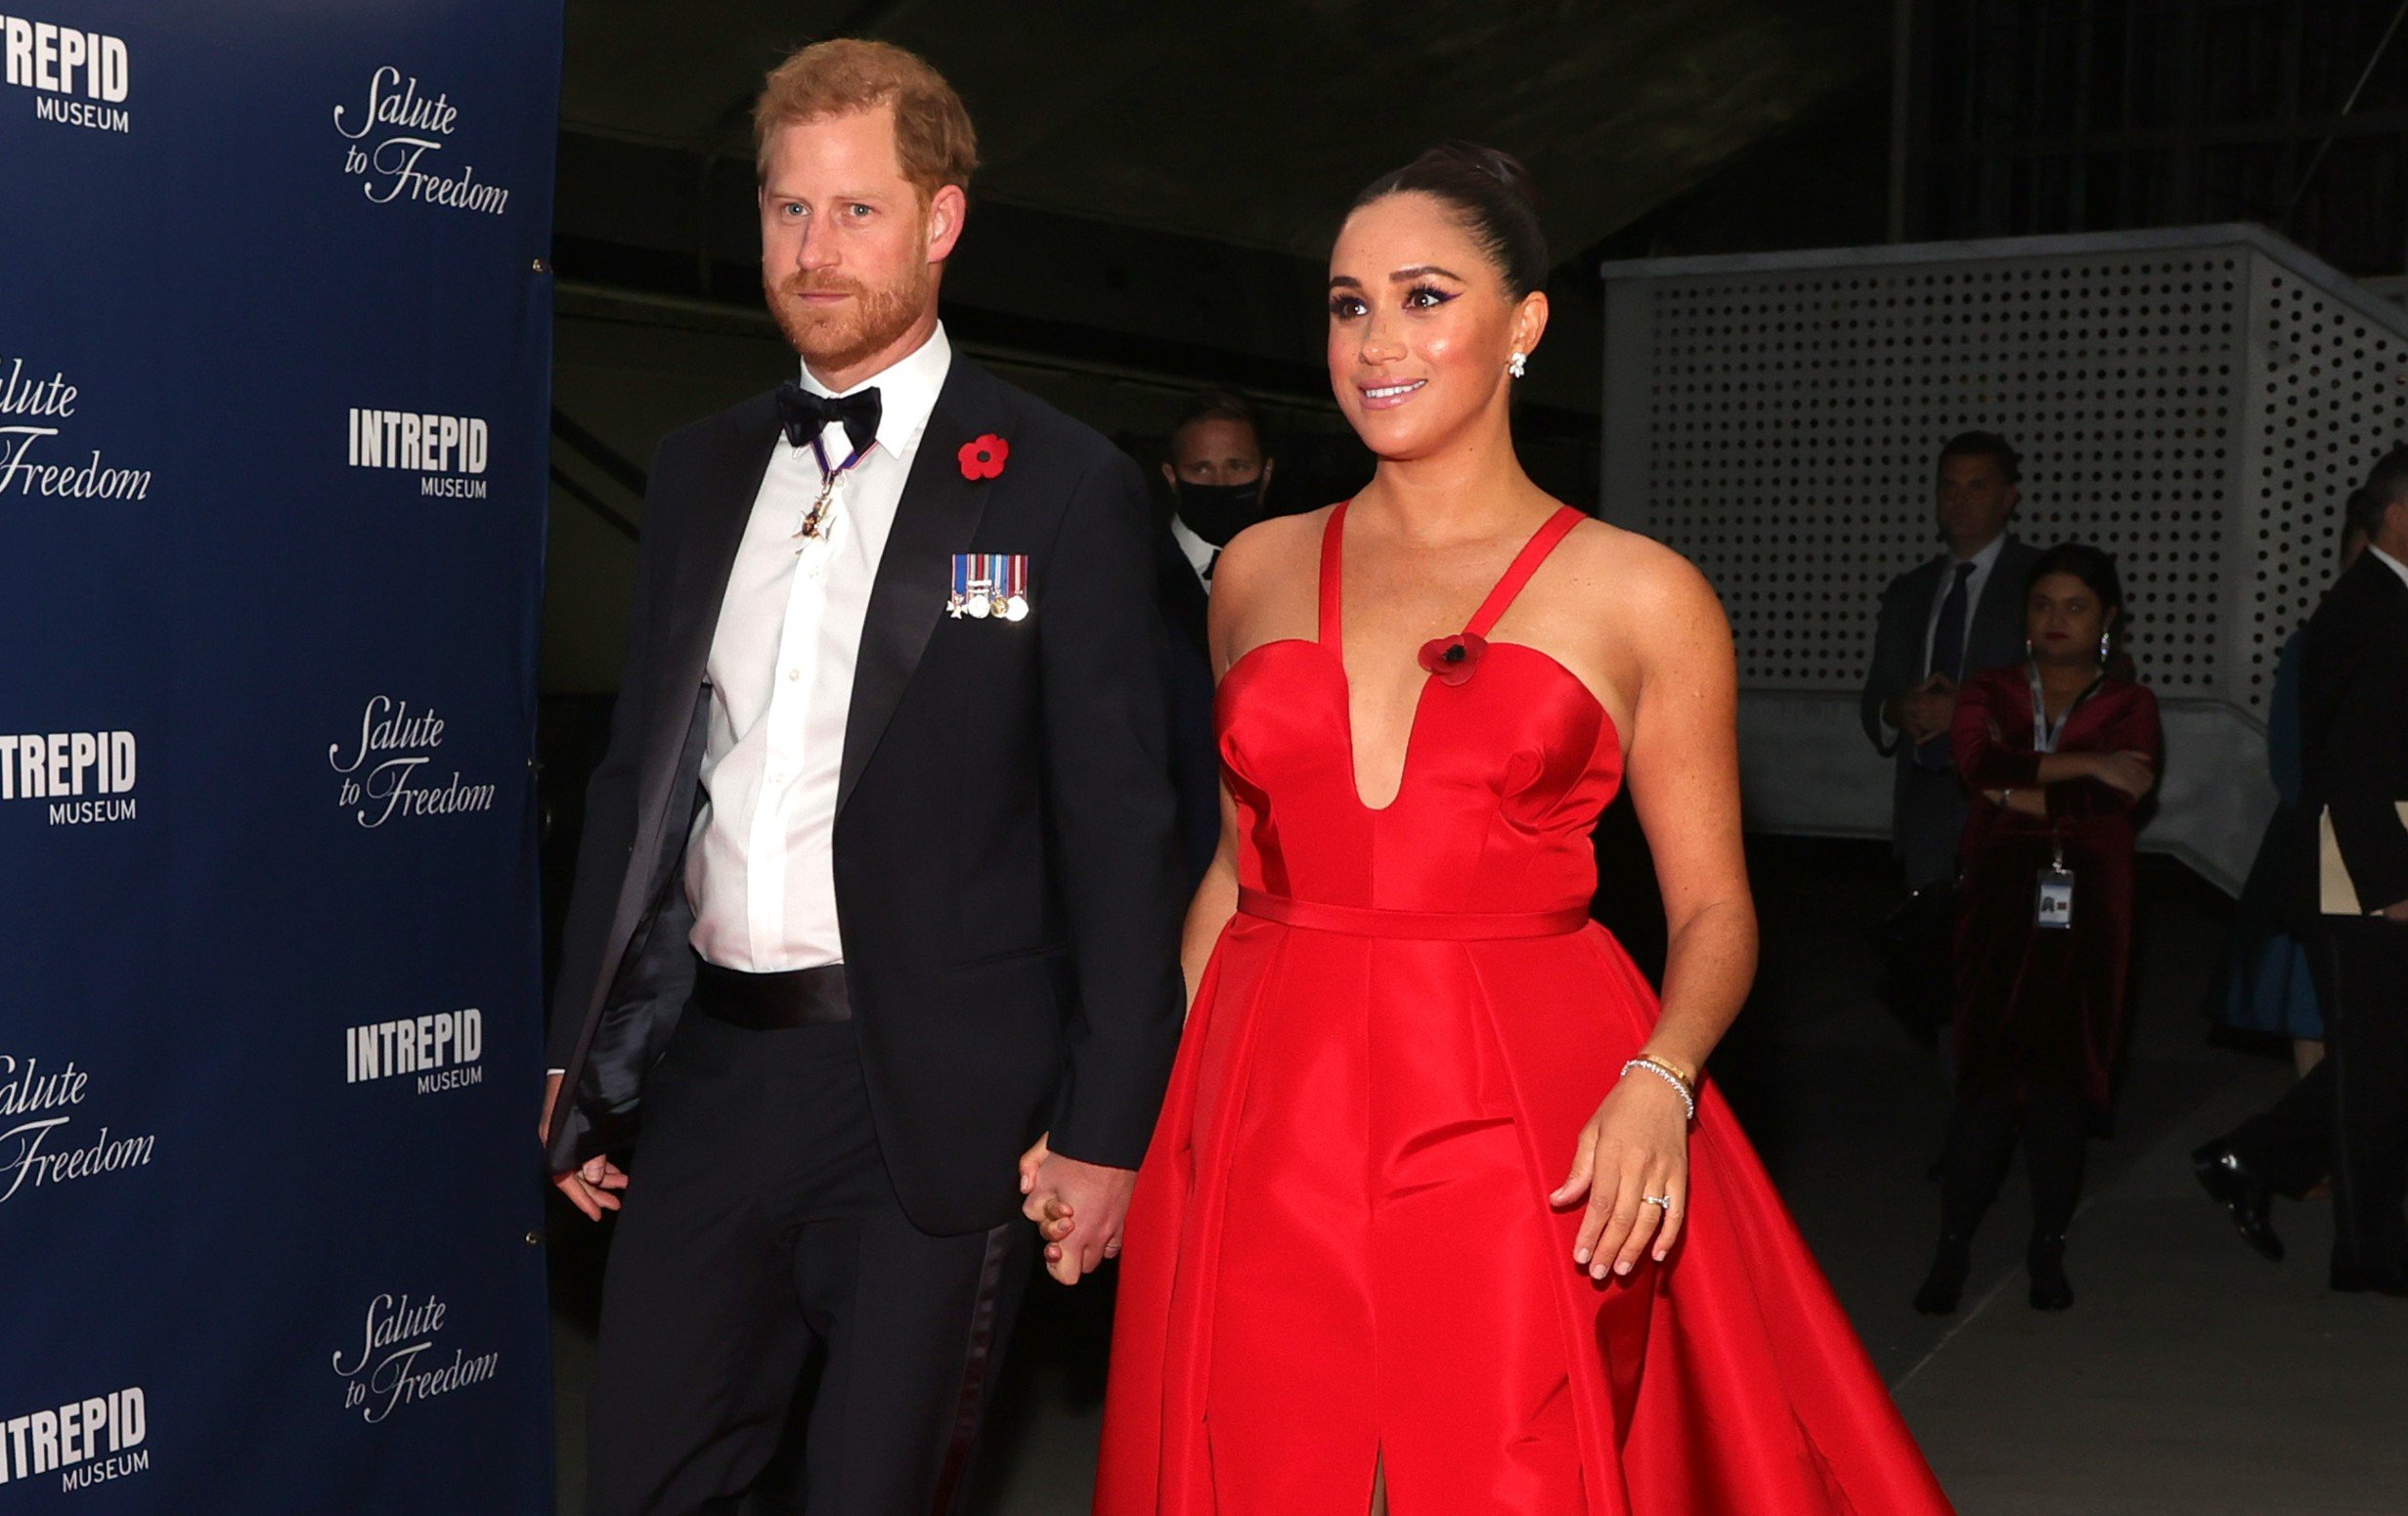 Spotify Allegedly Furious With Prince Harry, Meghan Markle’s Failed Productions; Streamer ‘Very Much Regrets’ $25 Million Deal, Source Claims